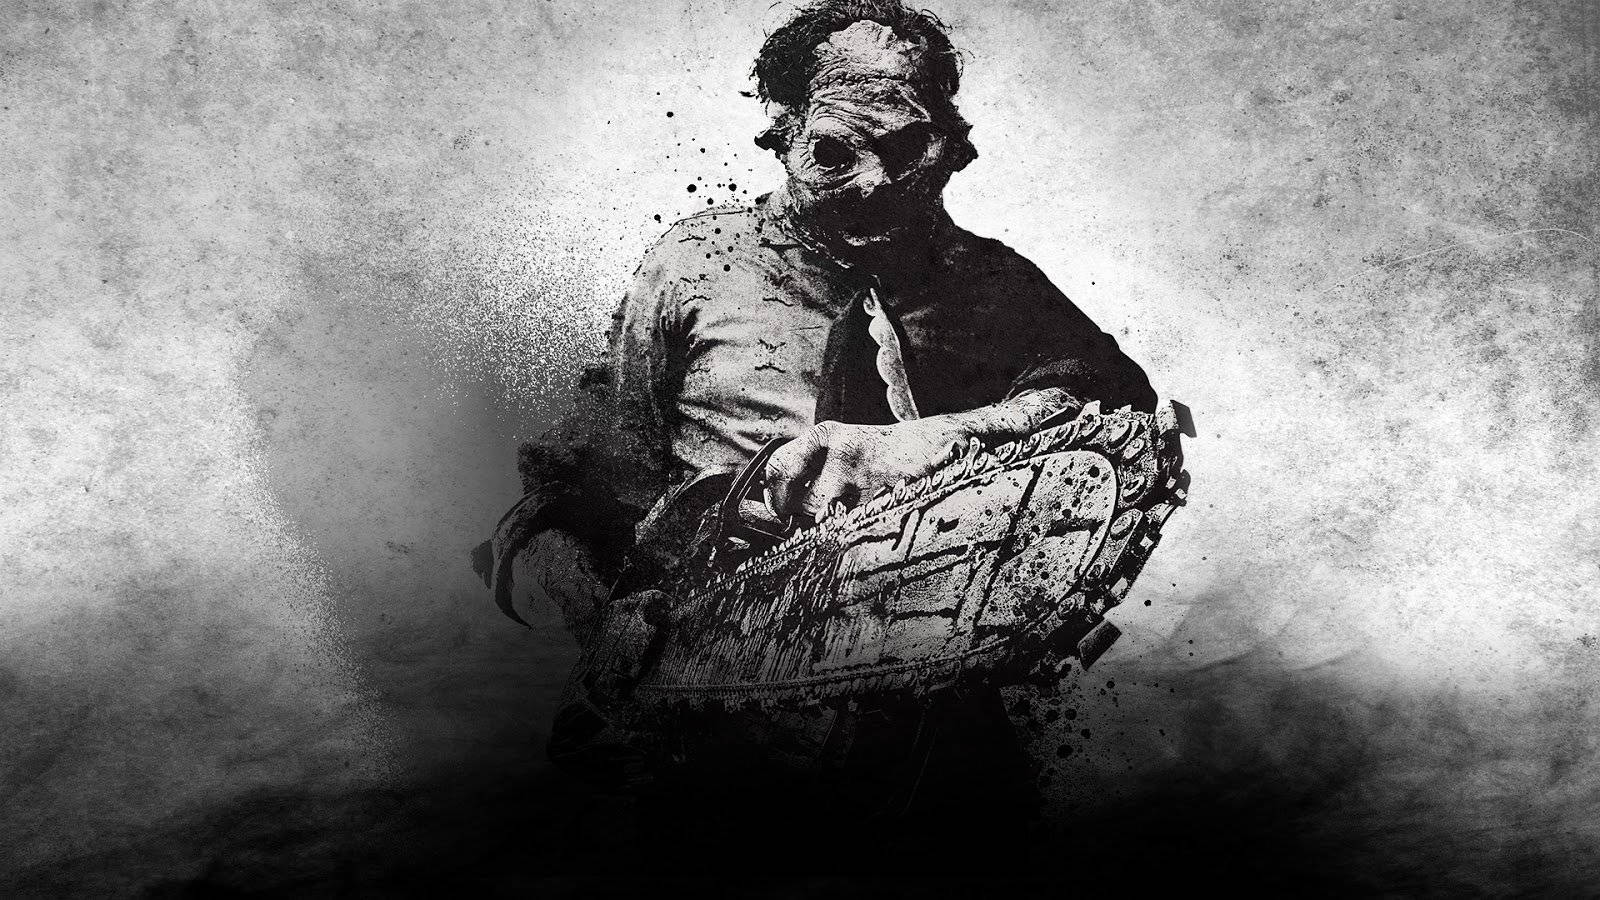 The Horrifying Look Of Leatherface In The Texas Chainsaw Massacre Background